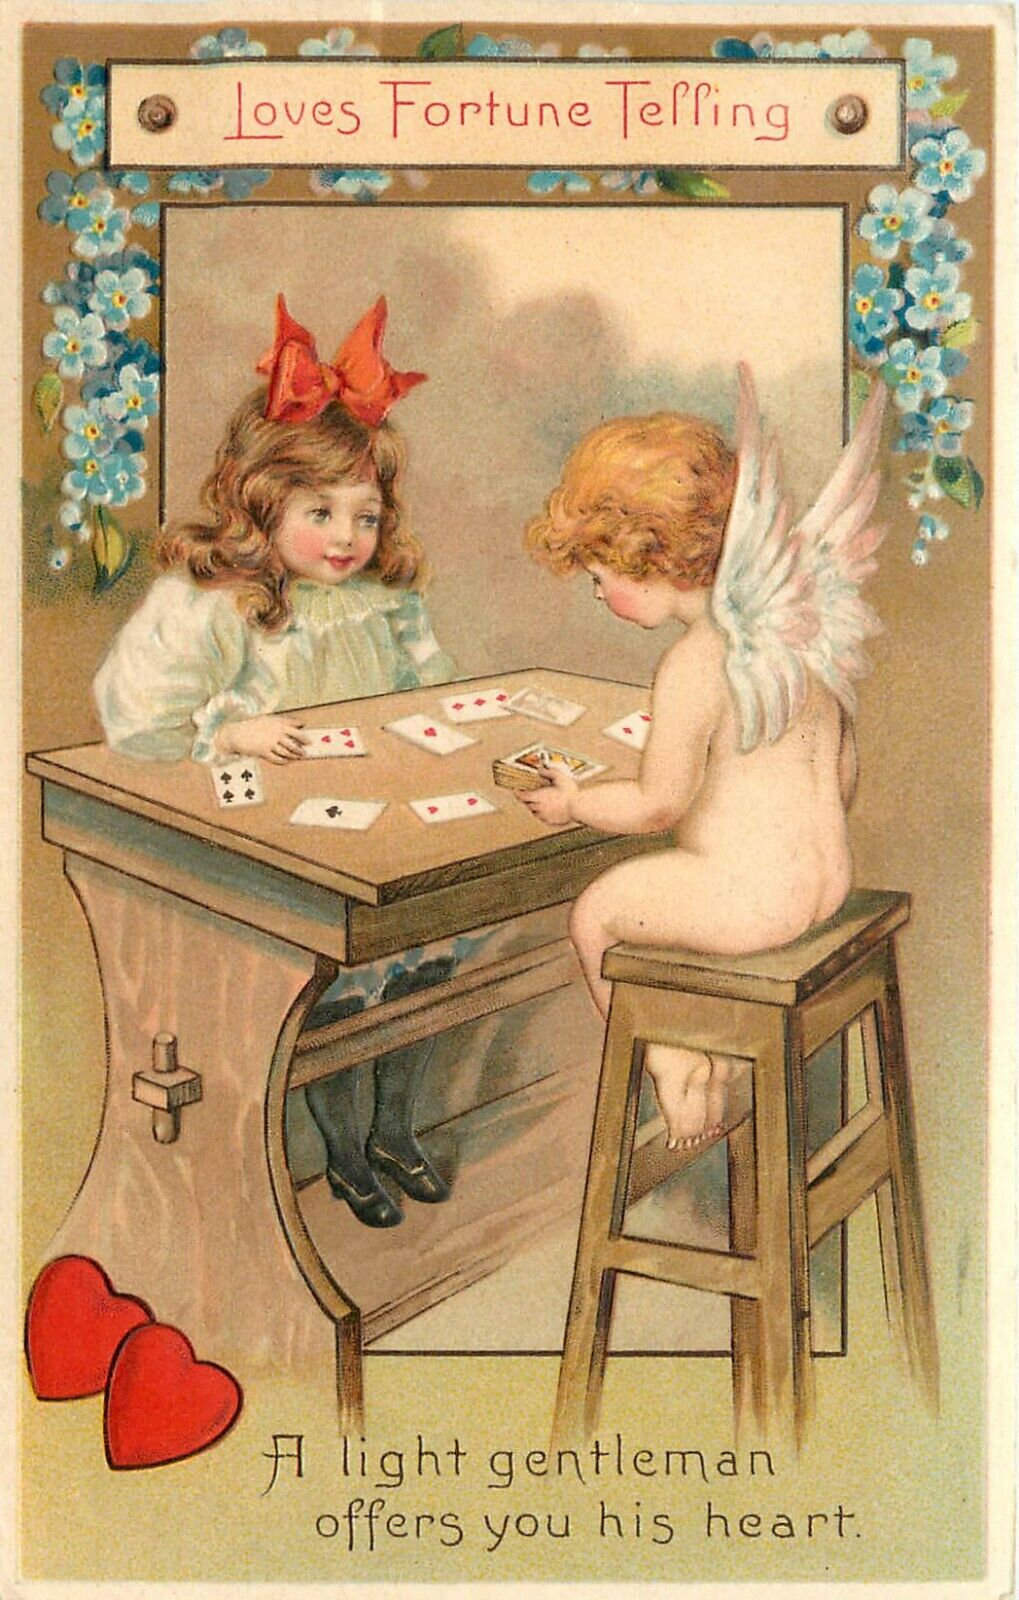 c1909 Embossed Valentine Postcard Love's Fortune Telling Cards Gent Offers Heart